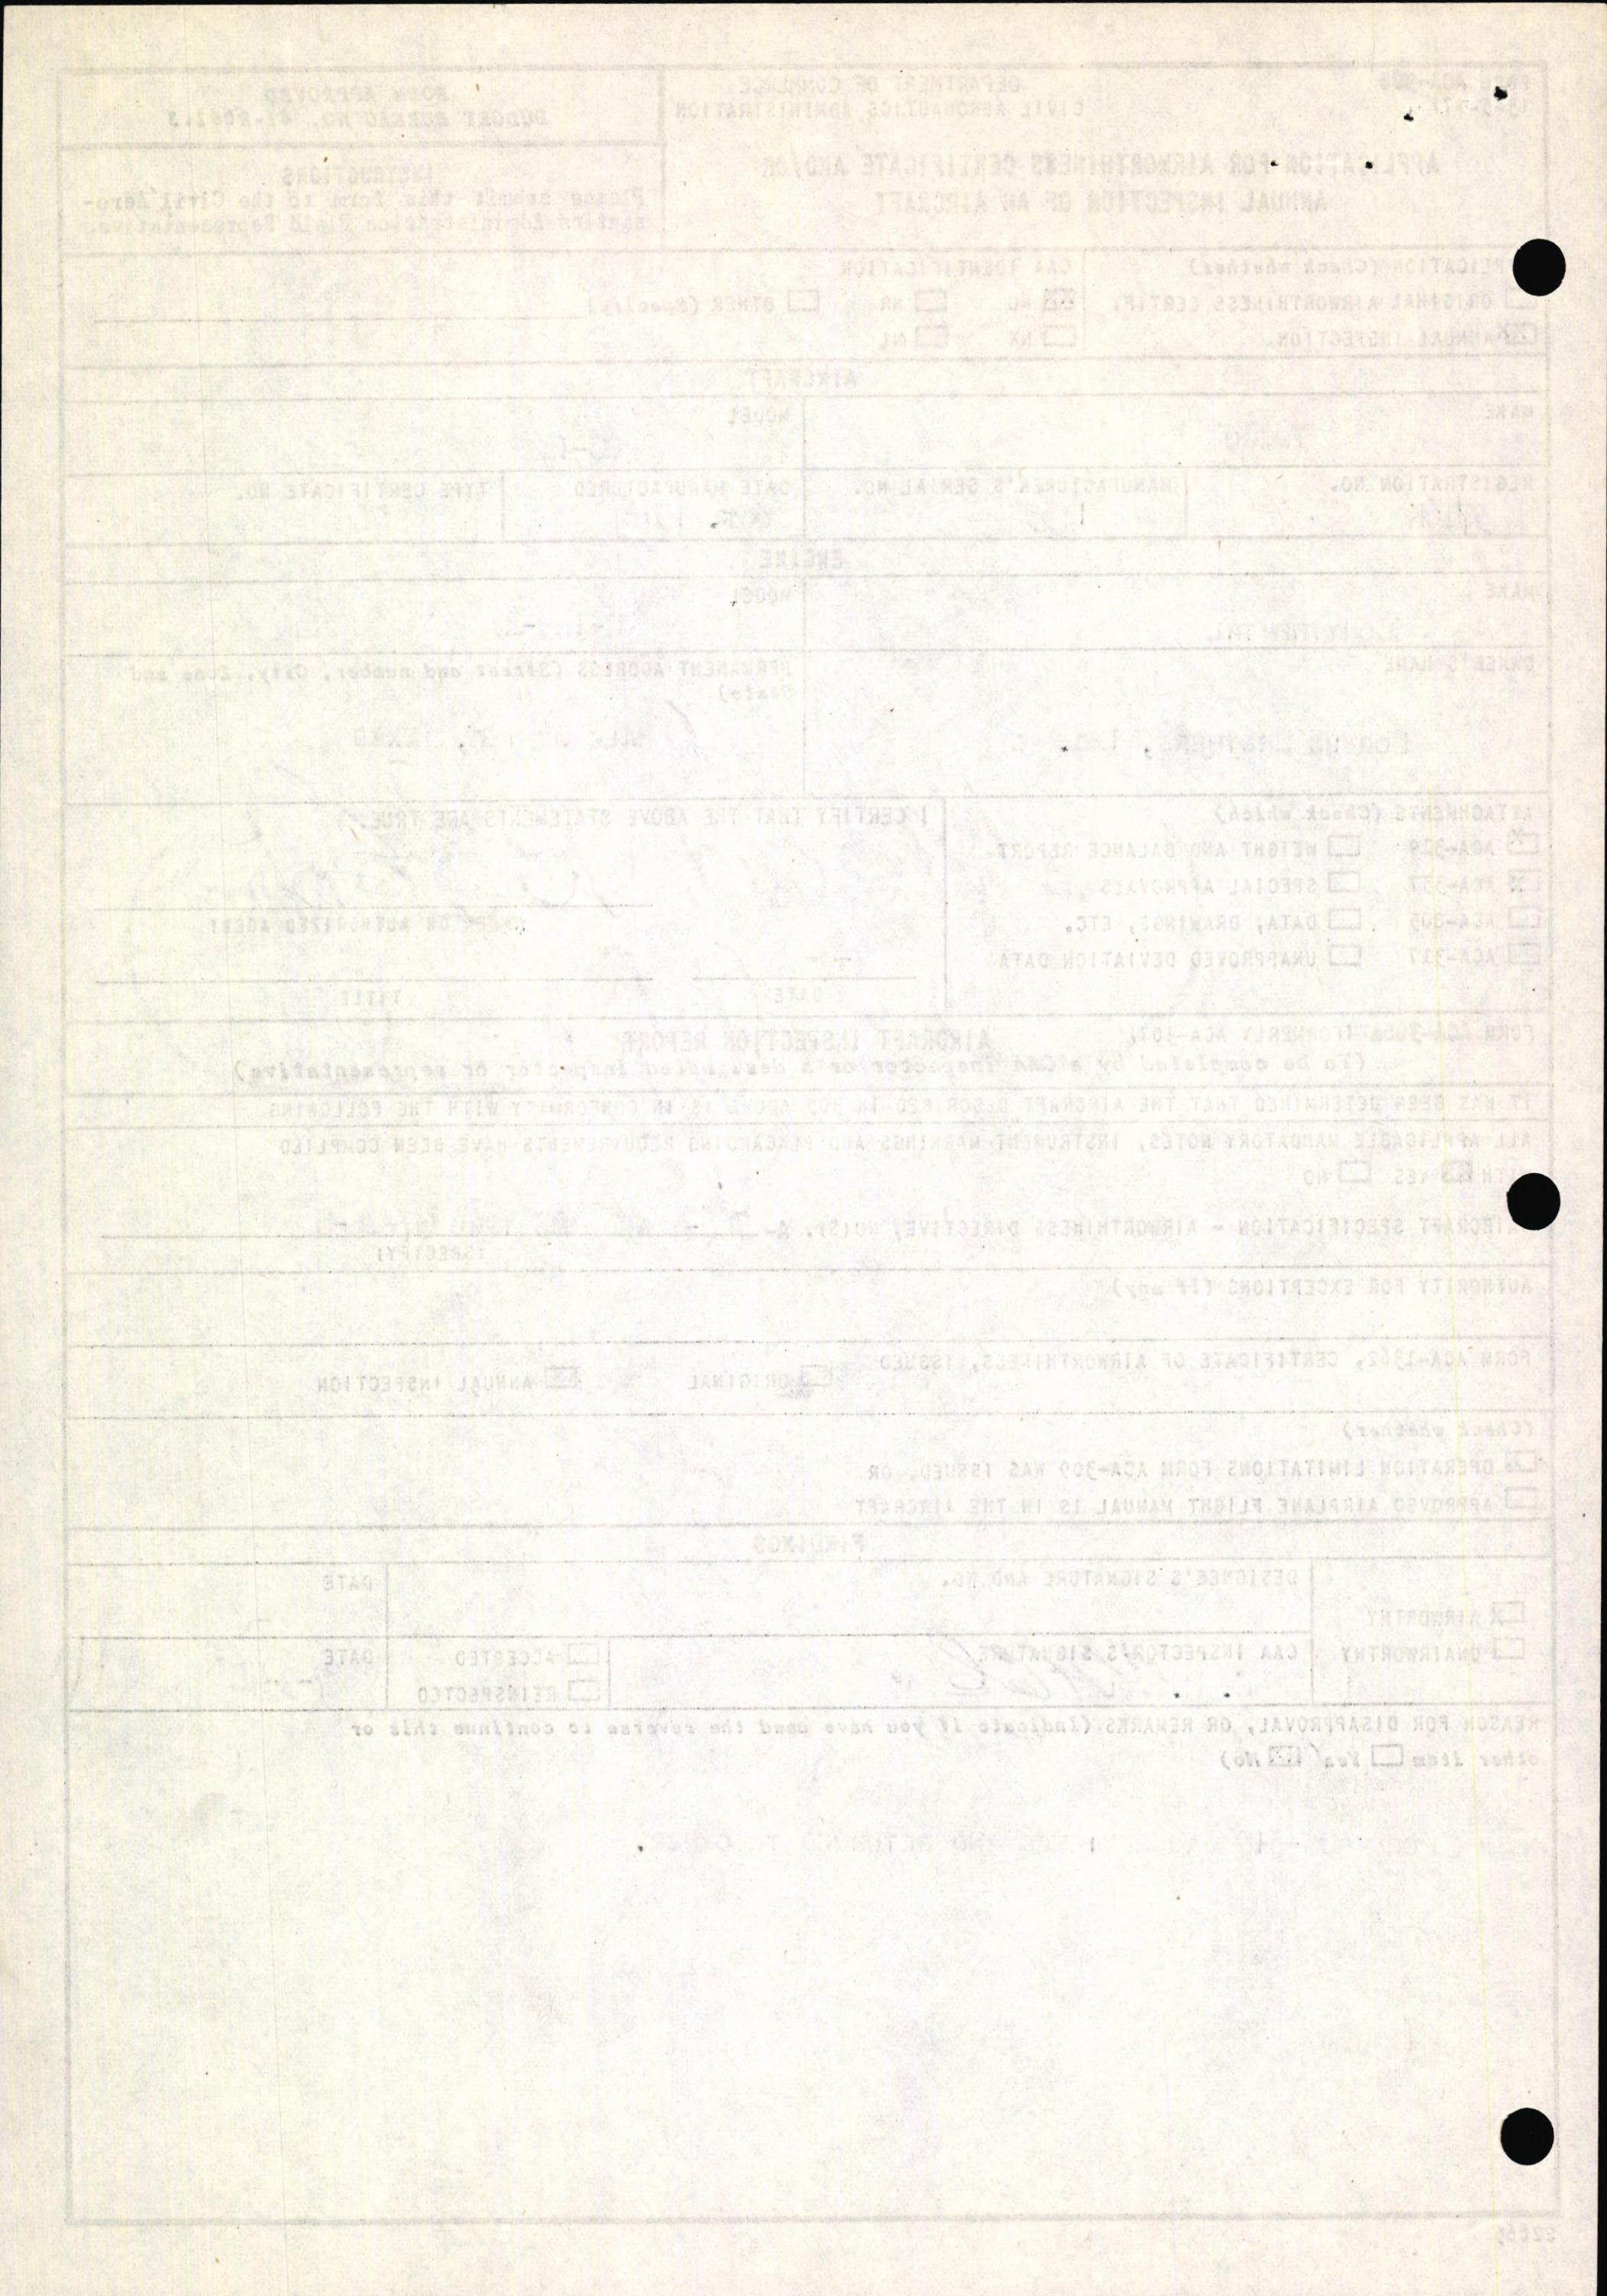 Sample page 6 from AirCorps Library document: Technical Information for Serial Number 1439